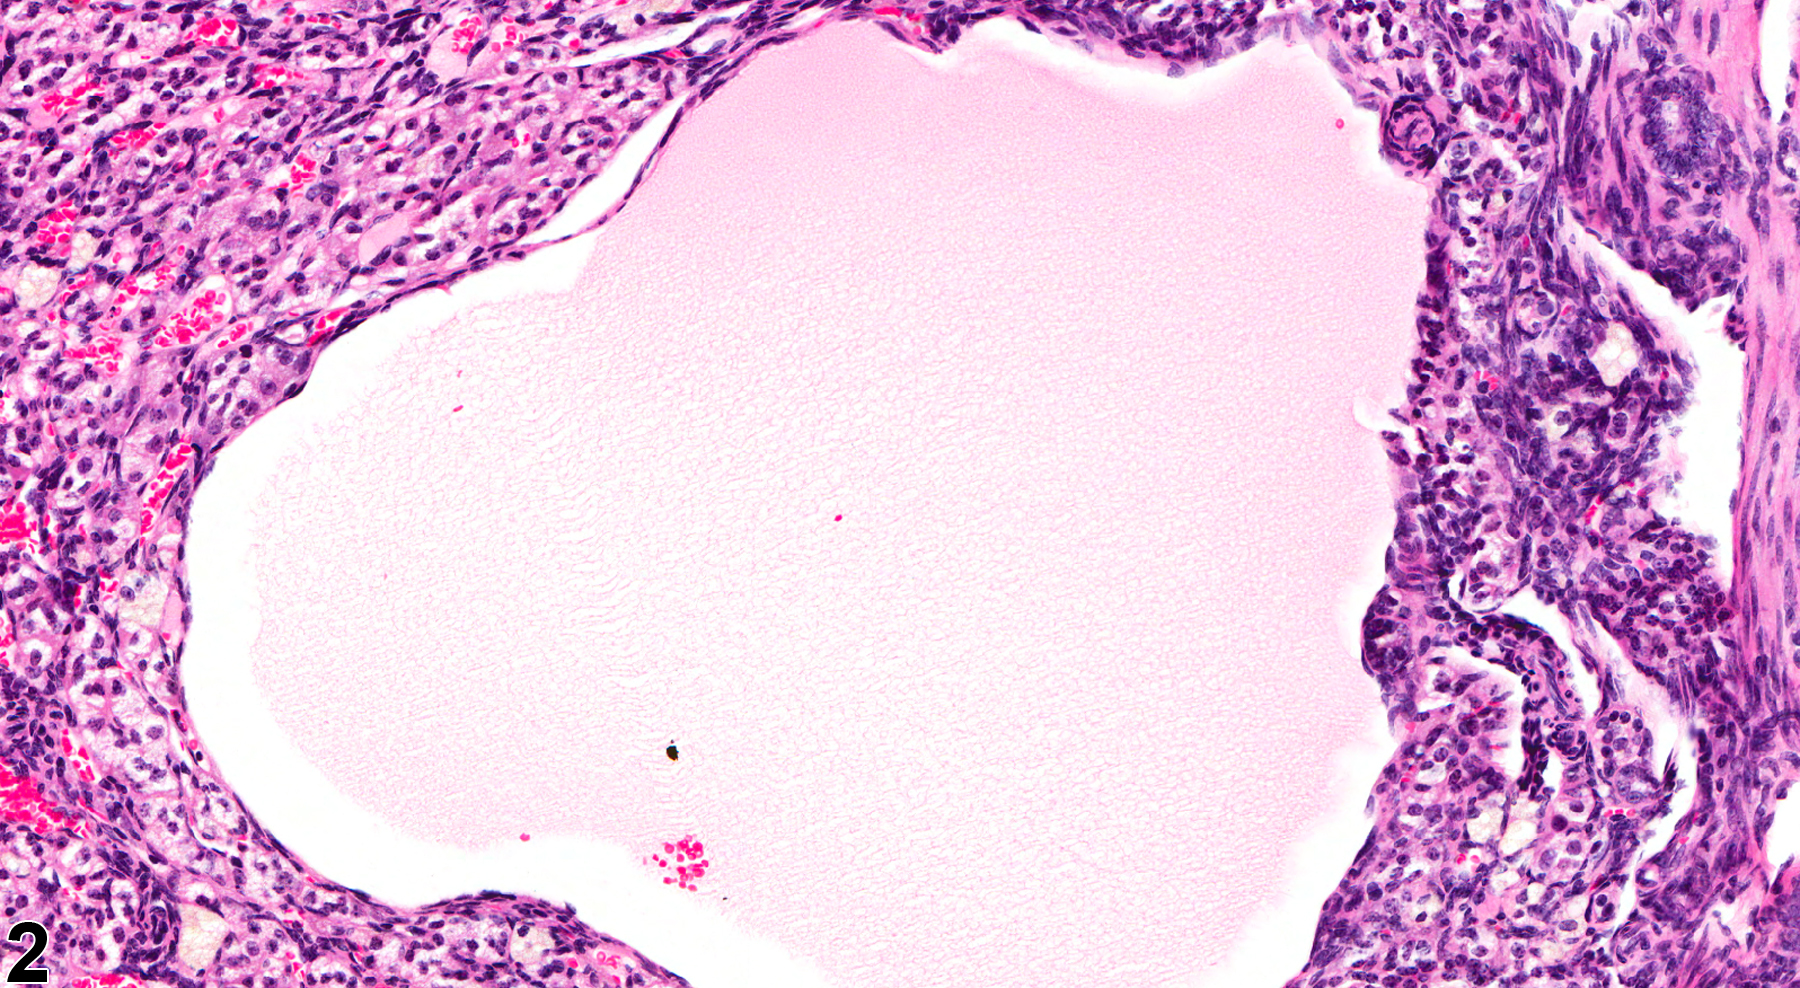 Image of cyst in the ovary from a female B6C3F1 mouse in a chronic study